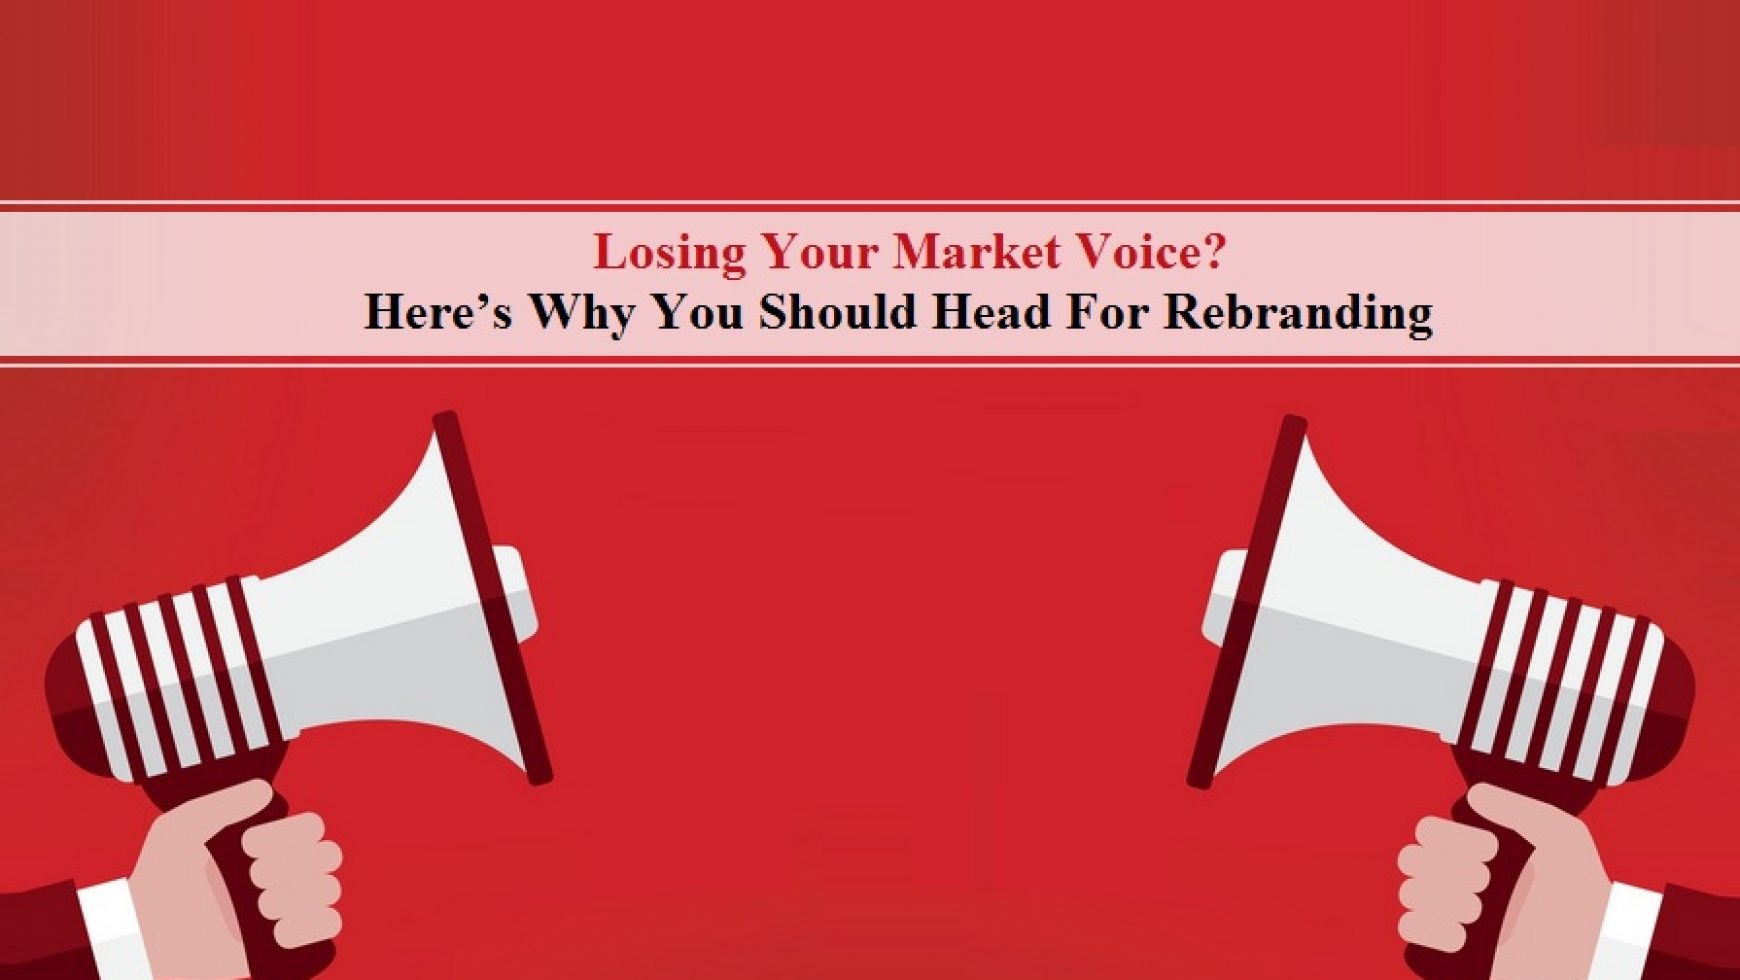 Losing Your Market Voice? Here’s Why You Should Head For Rebranding